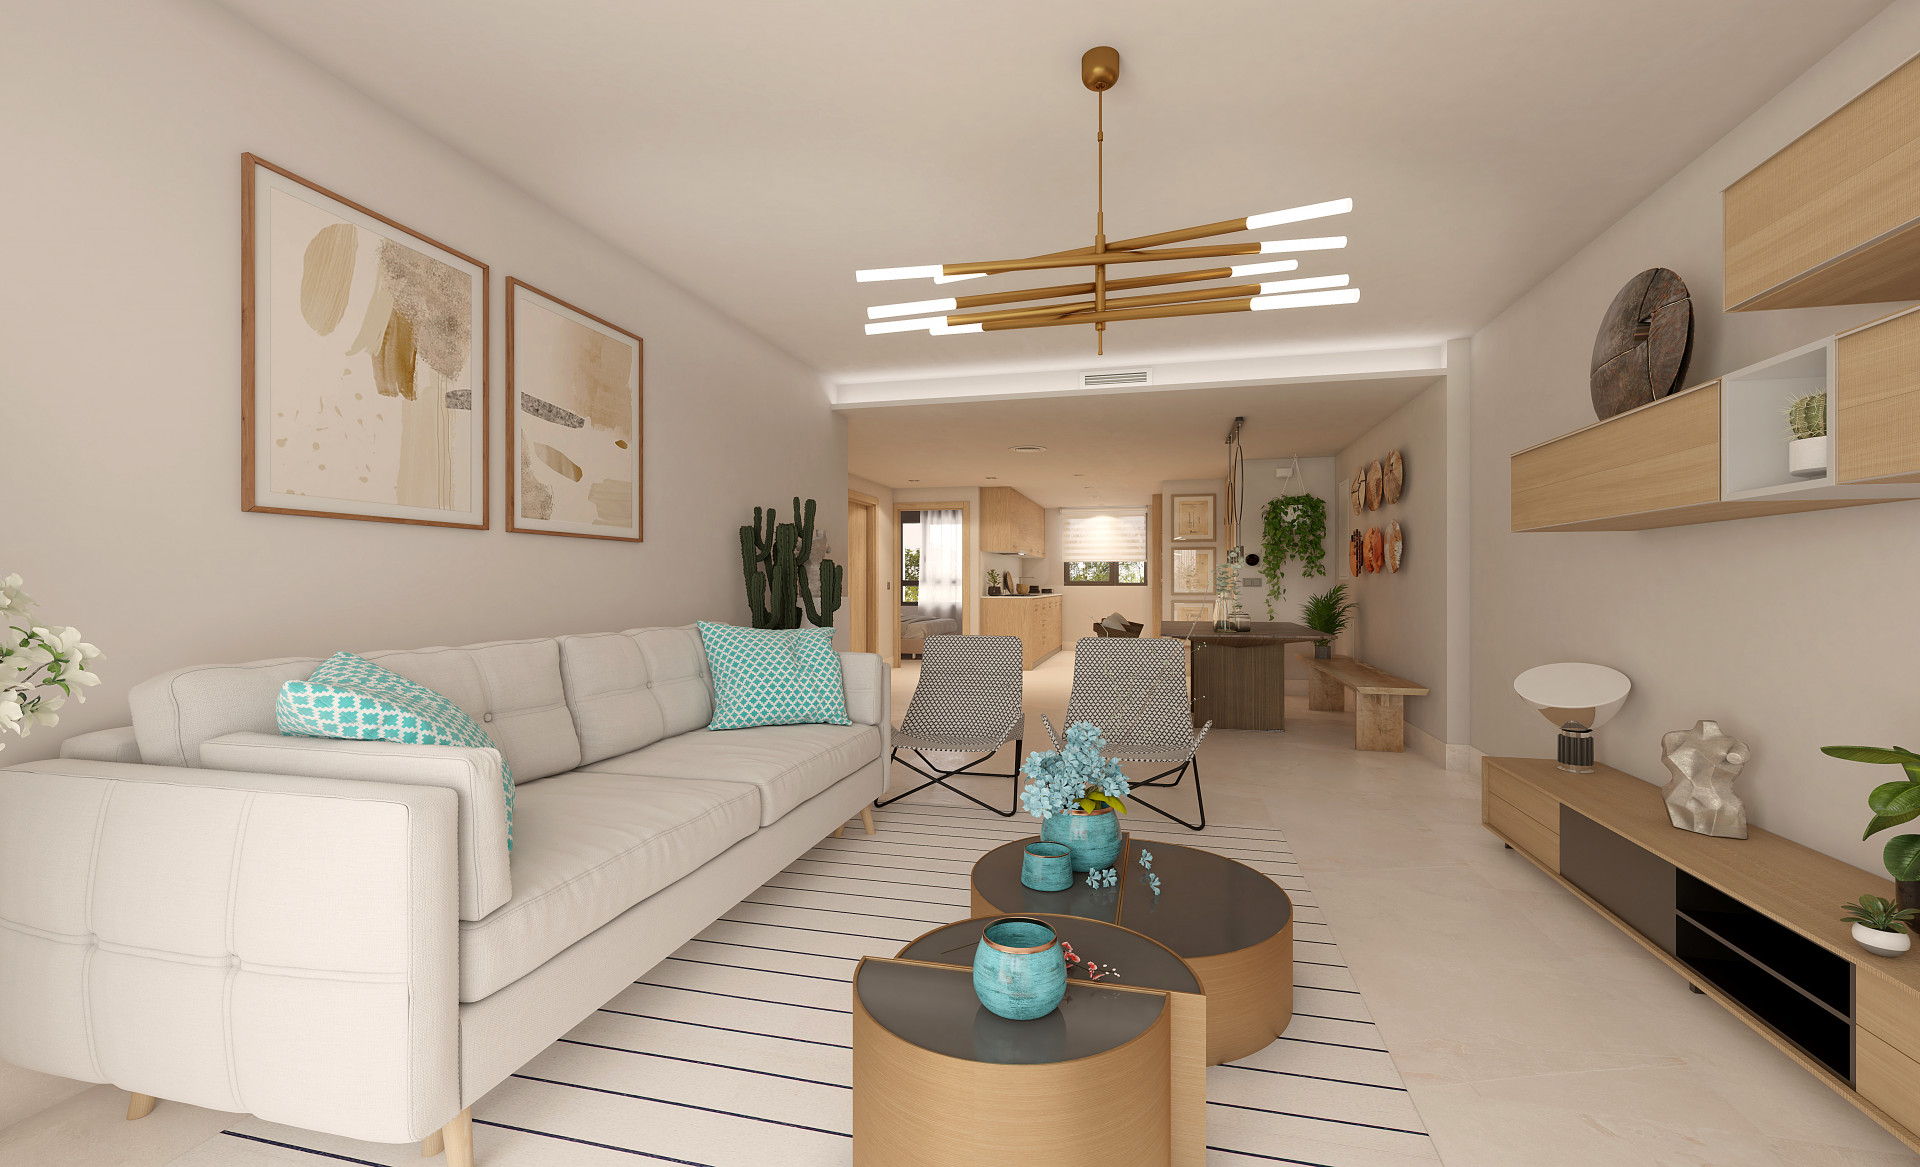 Ground floor flat with contemporary design garden and two bedrooms with sea views in Casares Playa. | Image 7